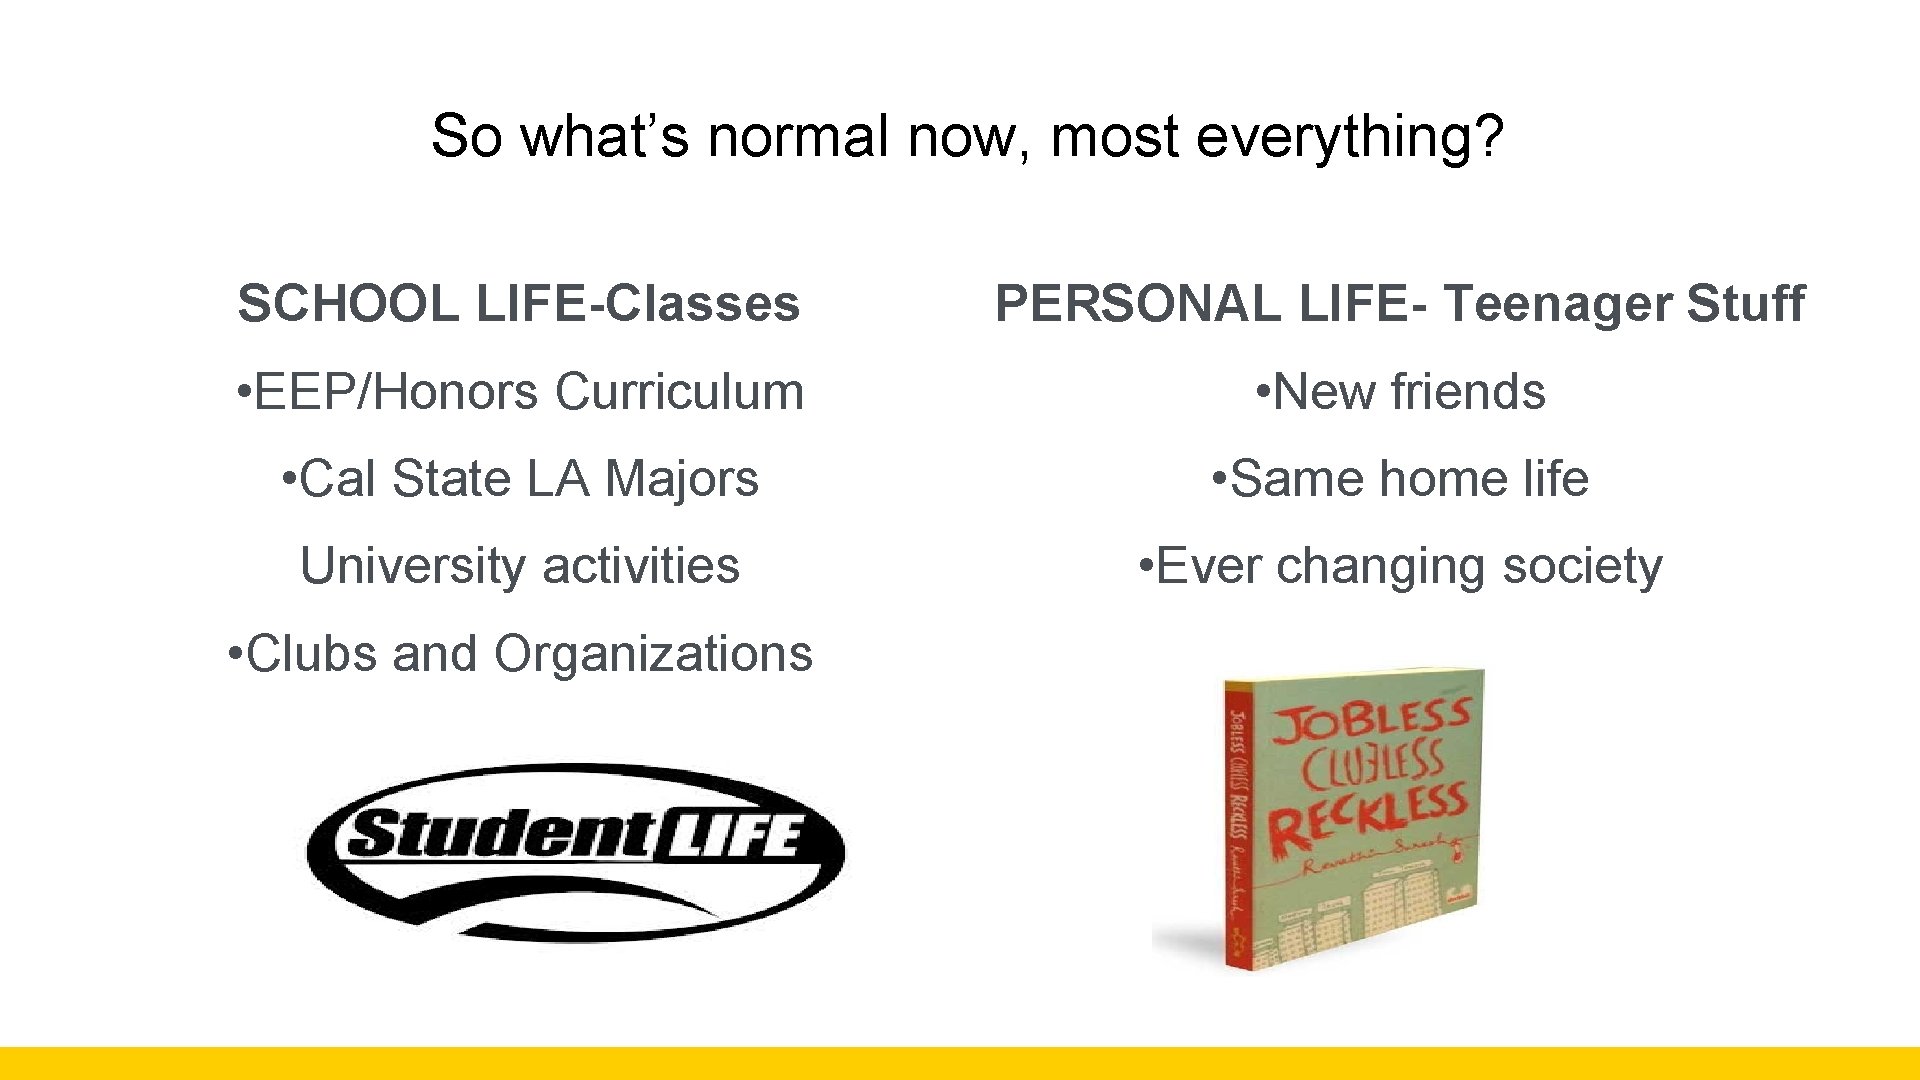  So what’s normal now, most everything? SCHOOL LIFE-Classes PERSONAL LIFE- Teenager Stuff •